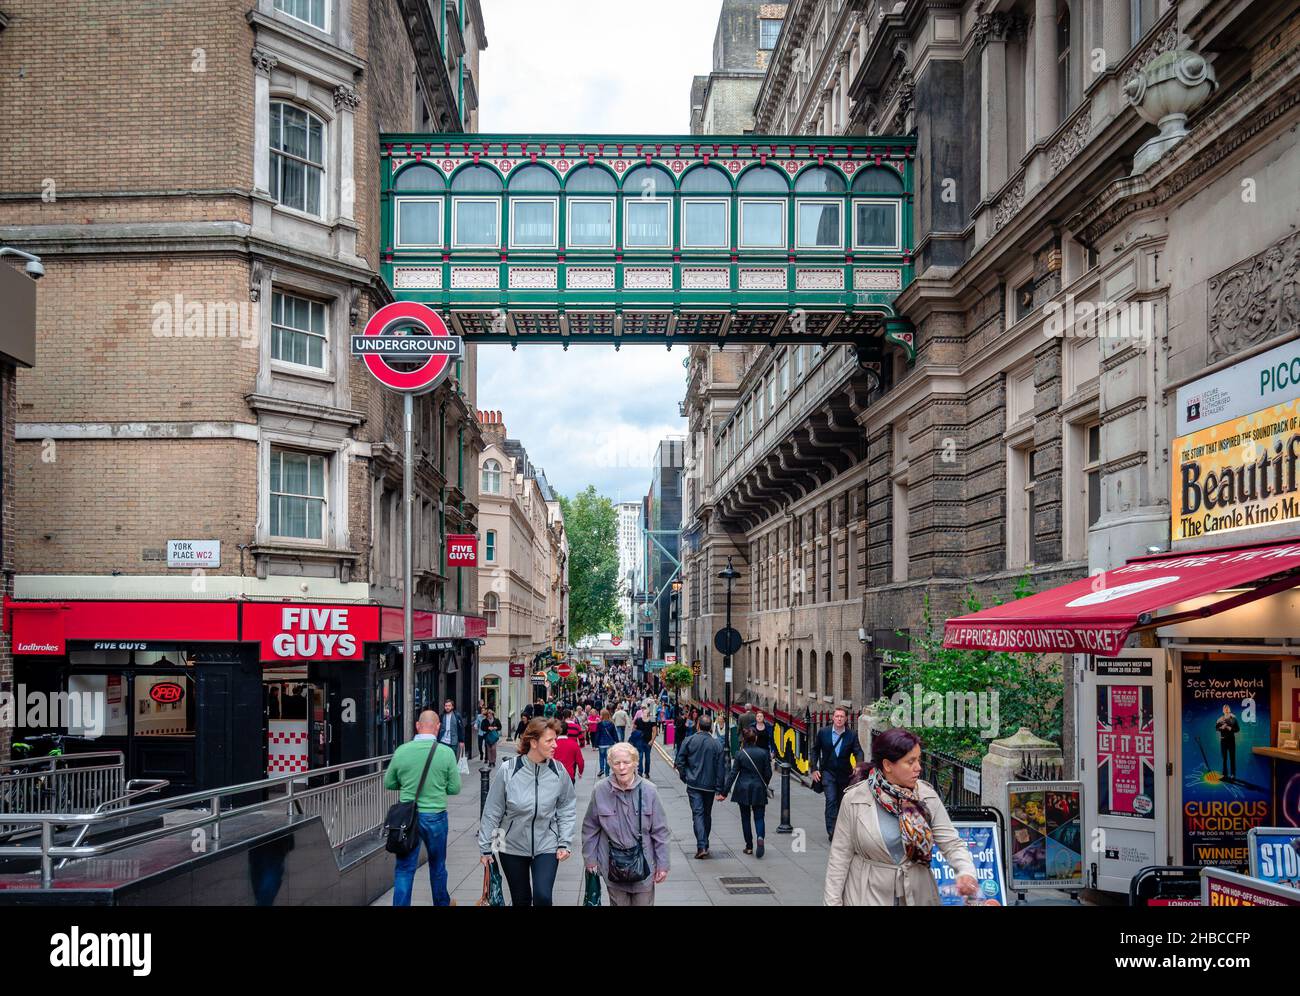 London, UK - September 4 2015: View of the crowded pedestrianised part of Villiers St in Charing Cross, with the overlooking railway station passage. Stock Photo